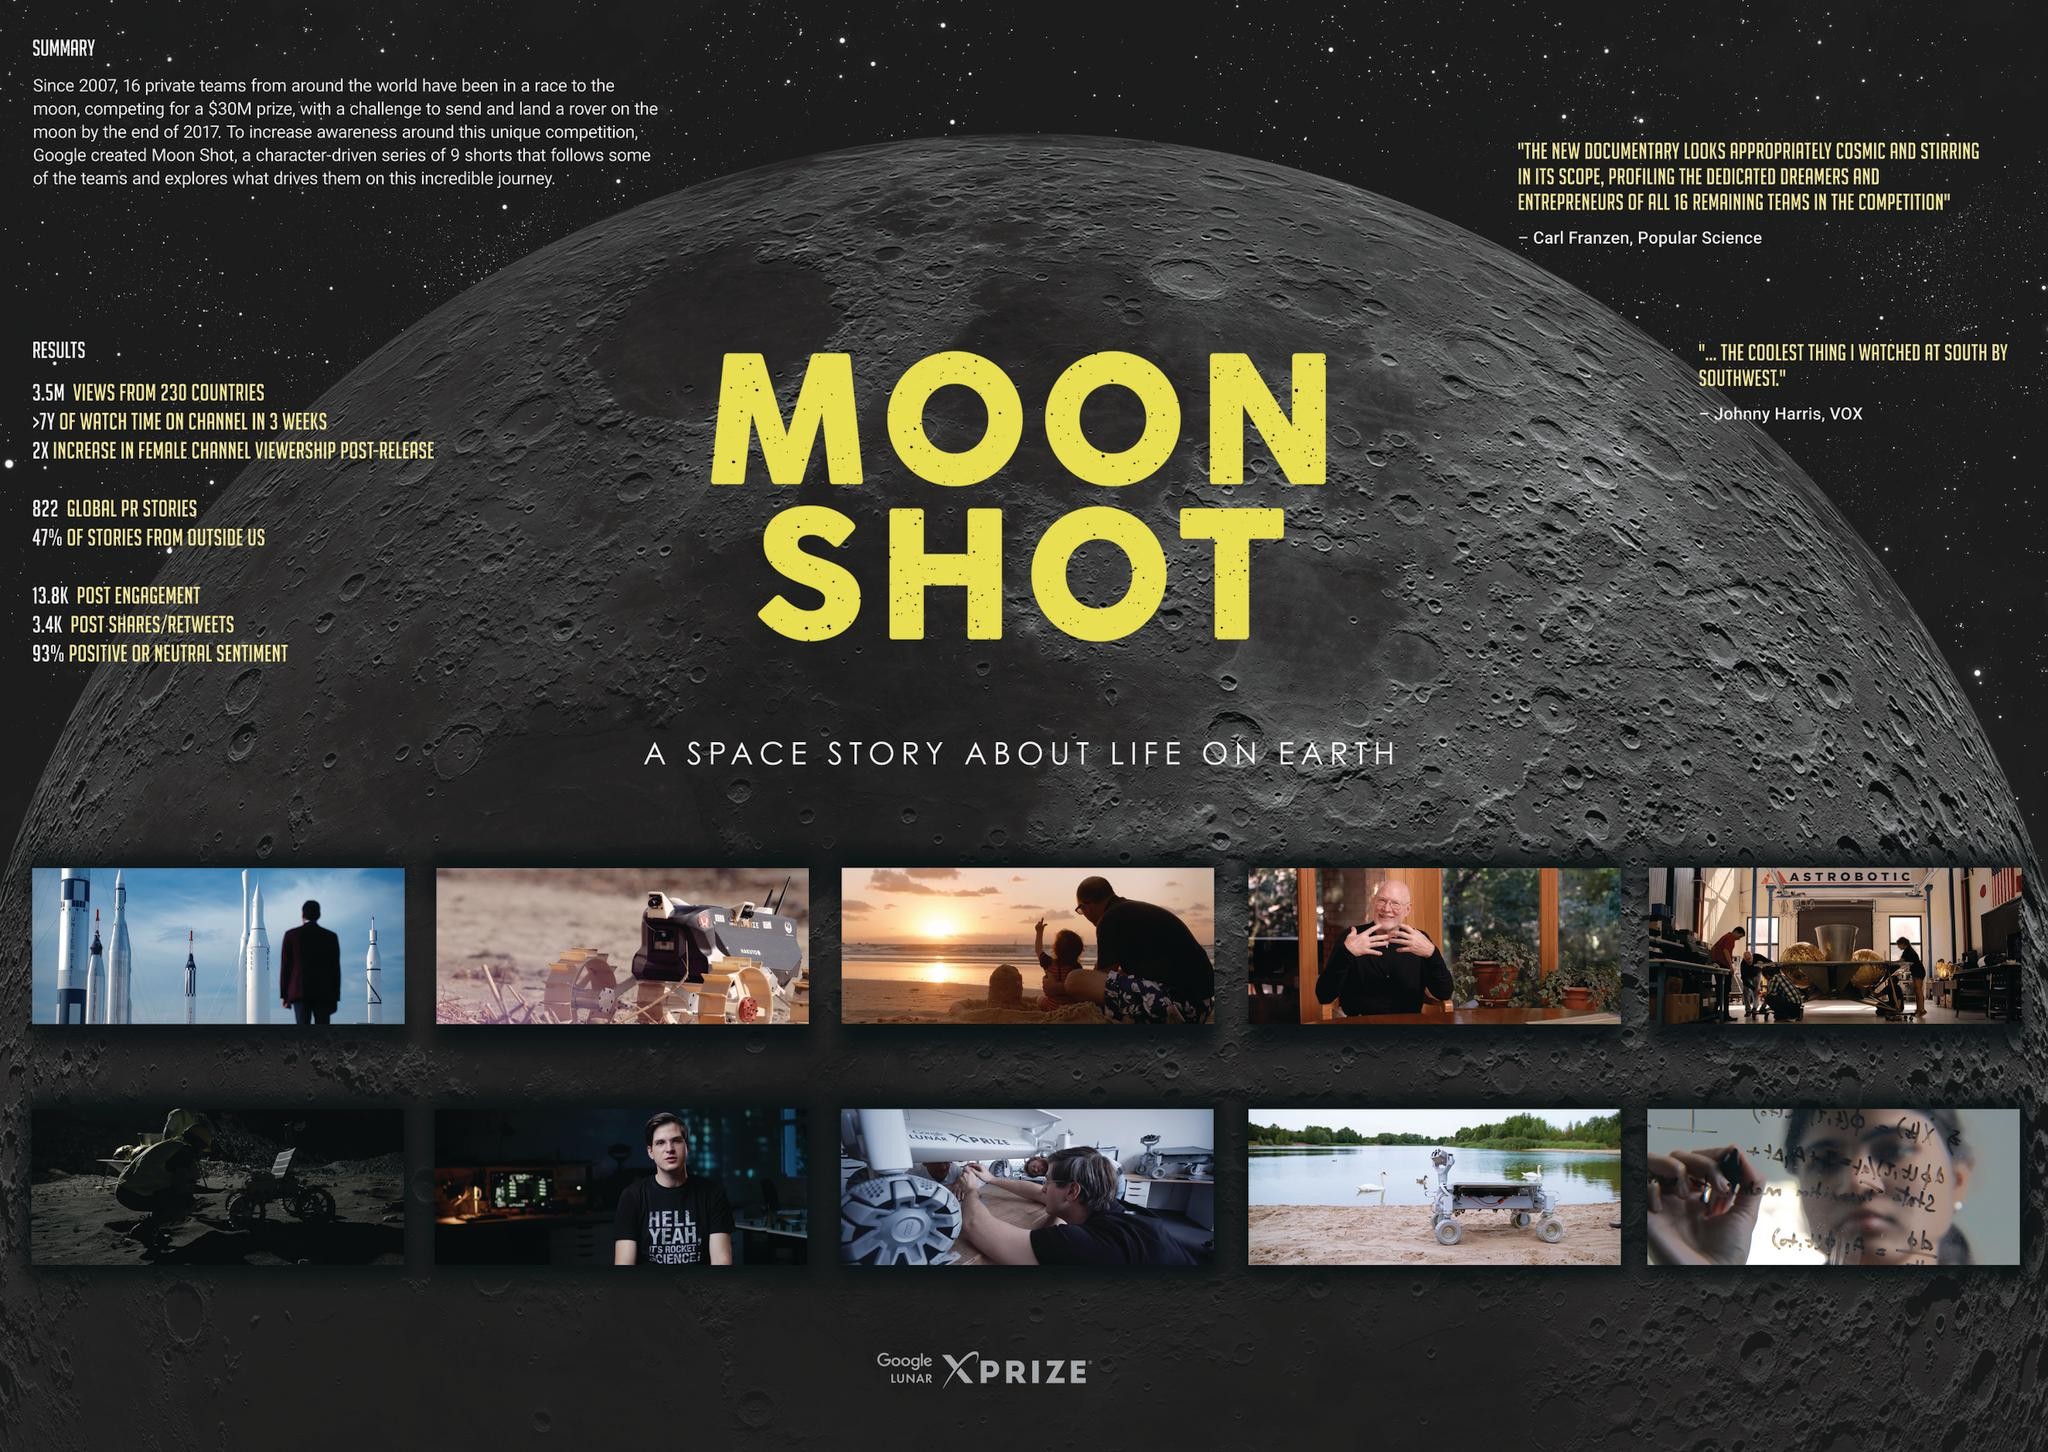 Moon Shot: a Space Story About Life on Earth